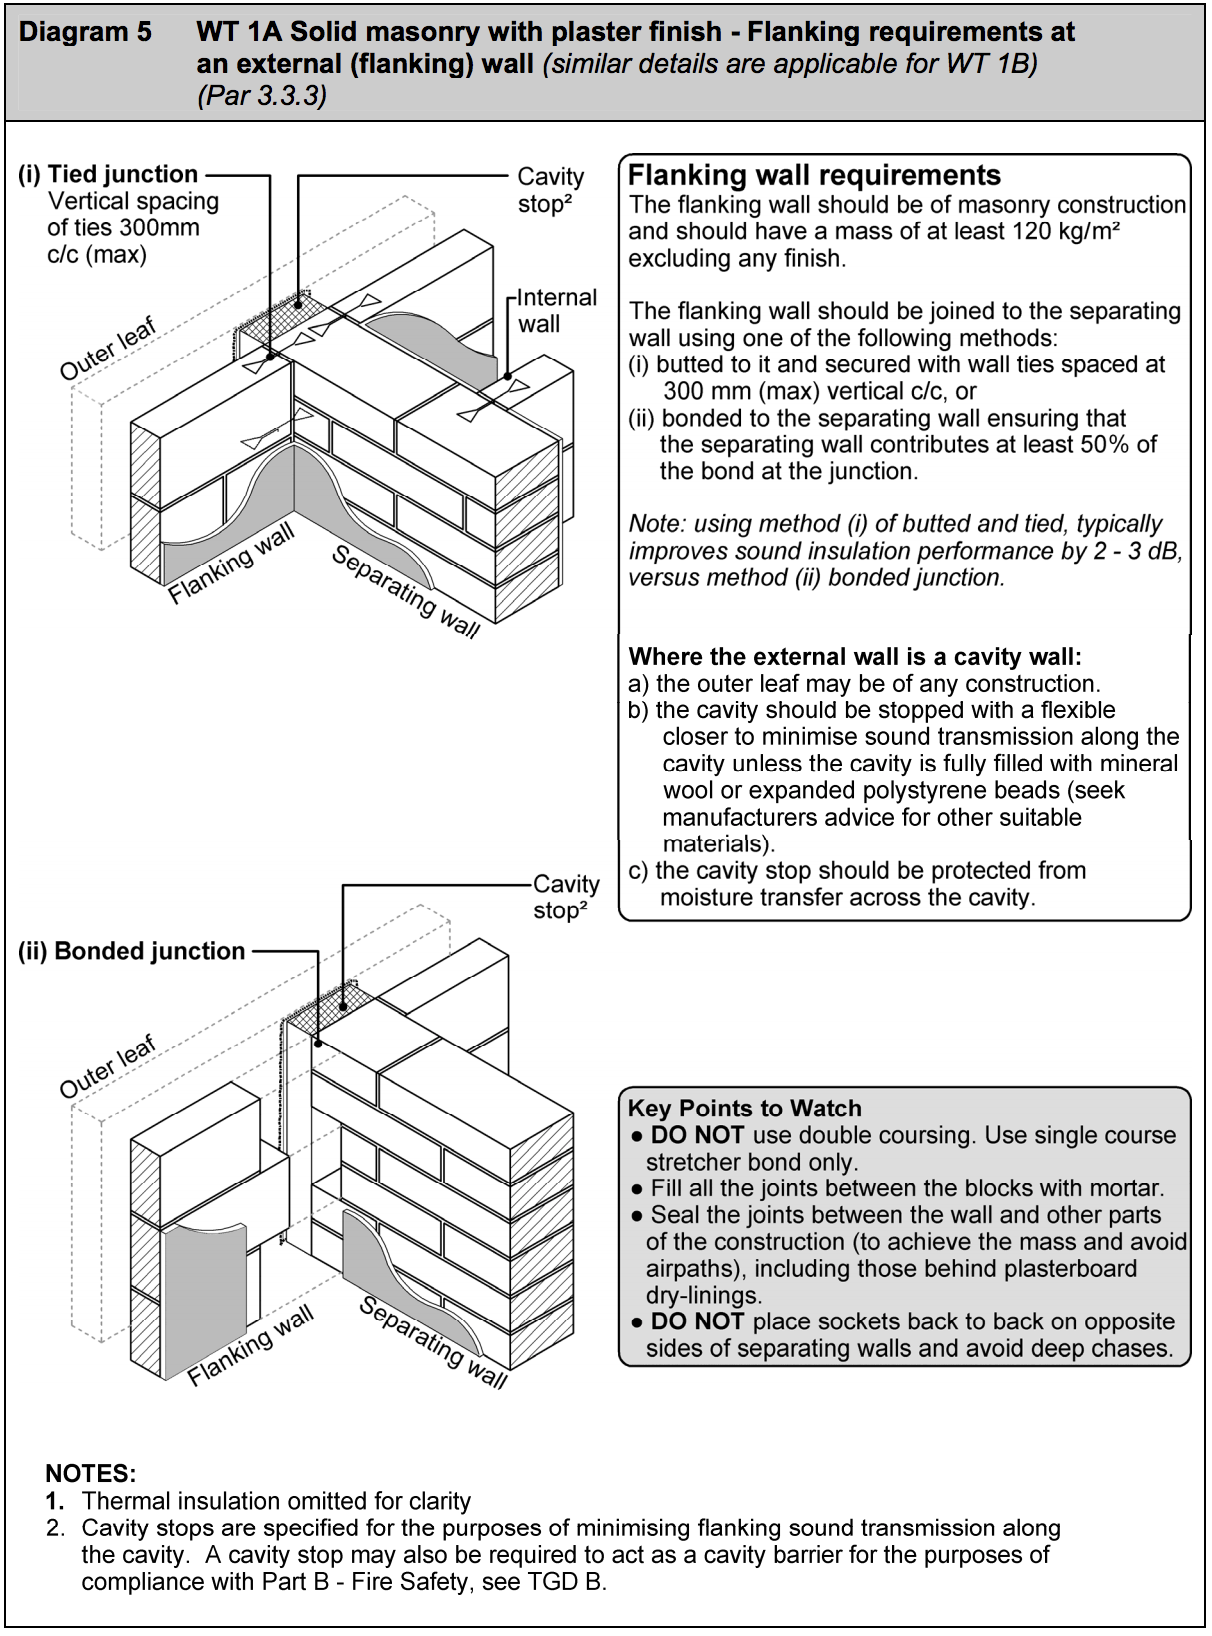 Diagram HE5 - WT 1A Solid masonry with plaster finish - flanking requirements at an external (flanking) wall - Extract from TGD E